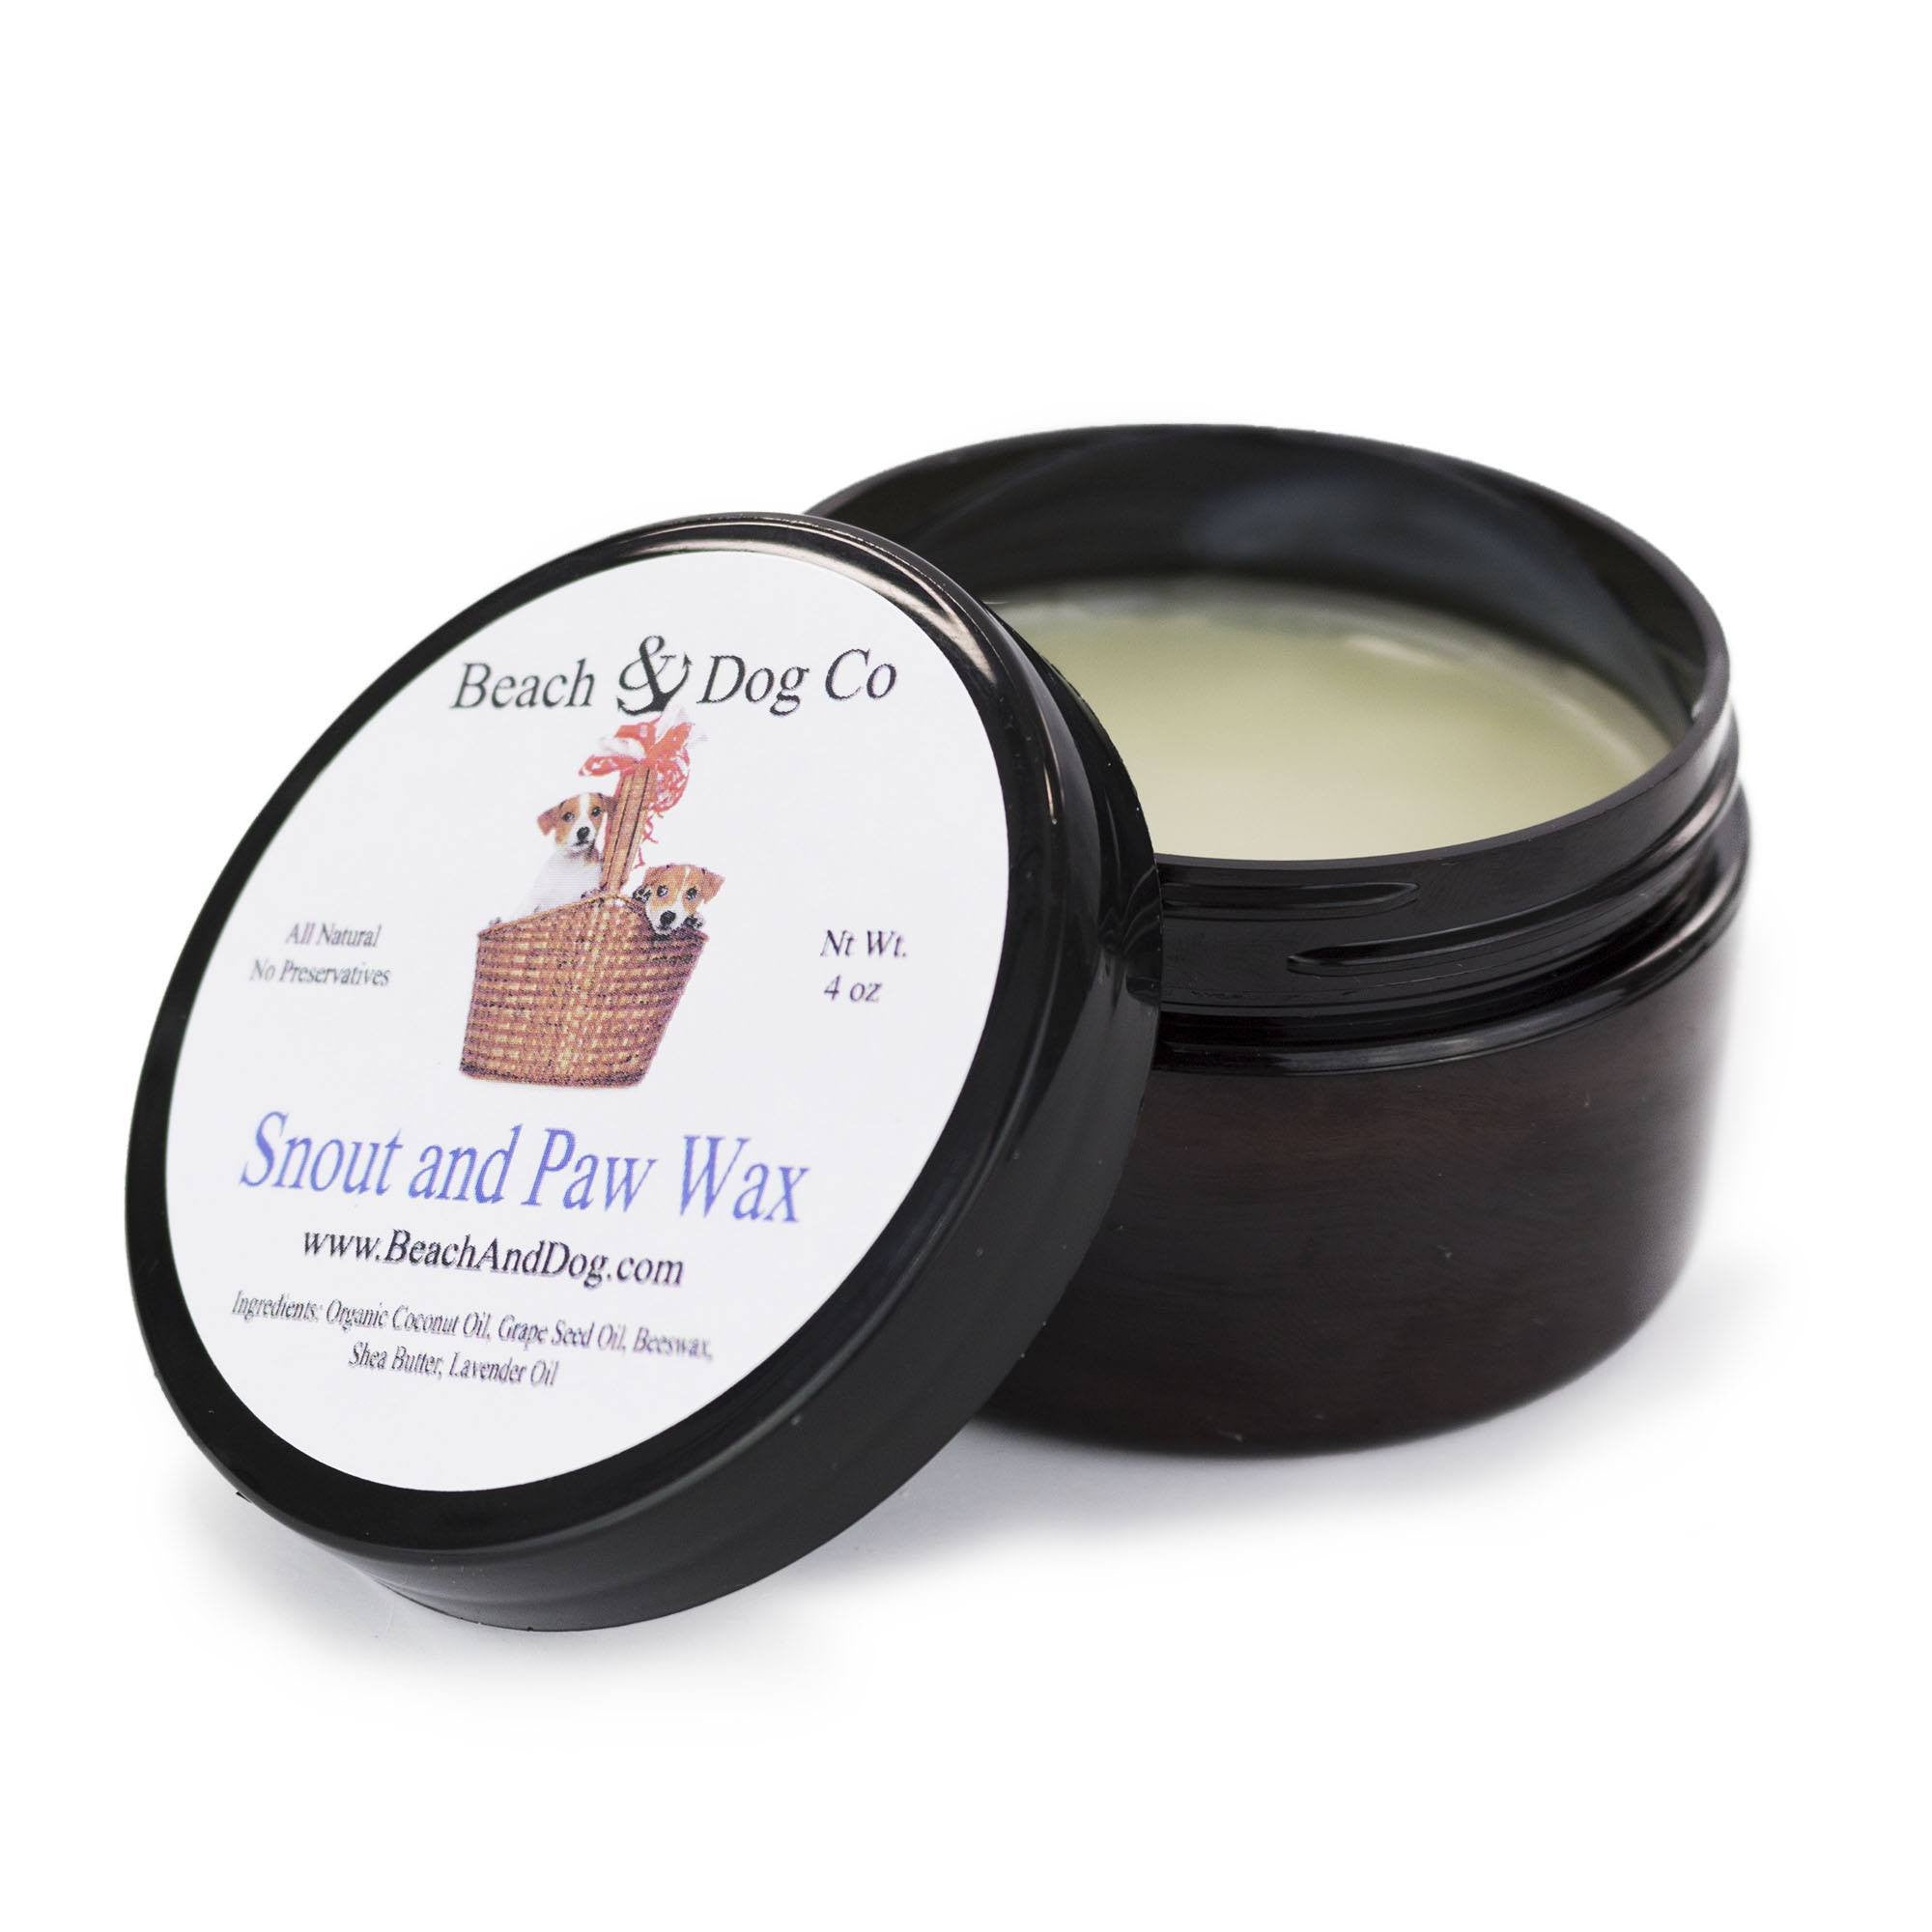 Snout and Paw Wax (4 oz) For Dry Chapped Cracked Noses and Paws - Beach & Dog Co.